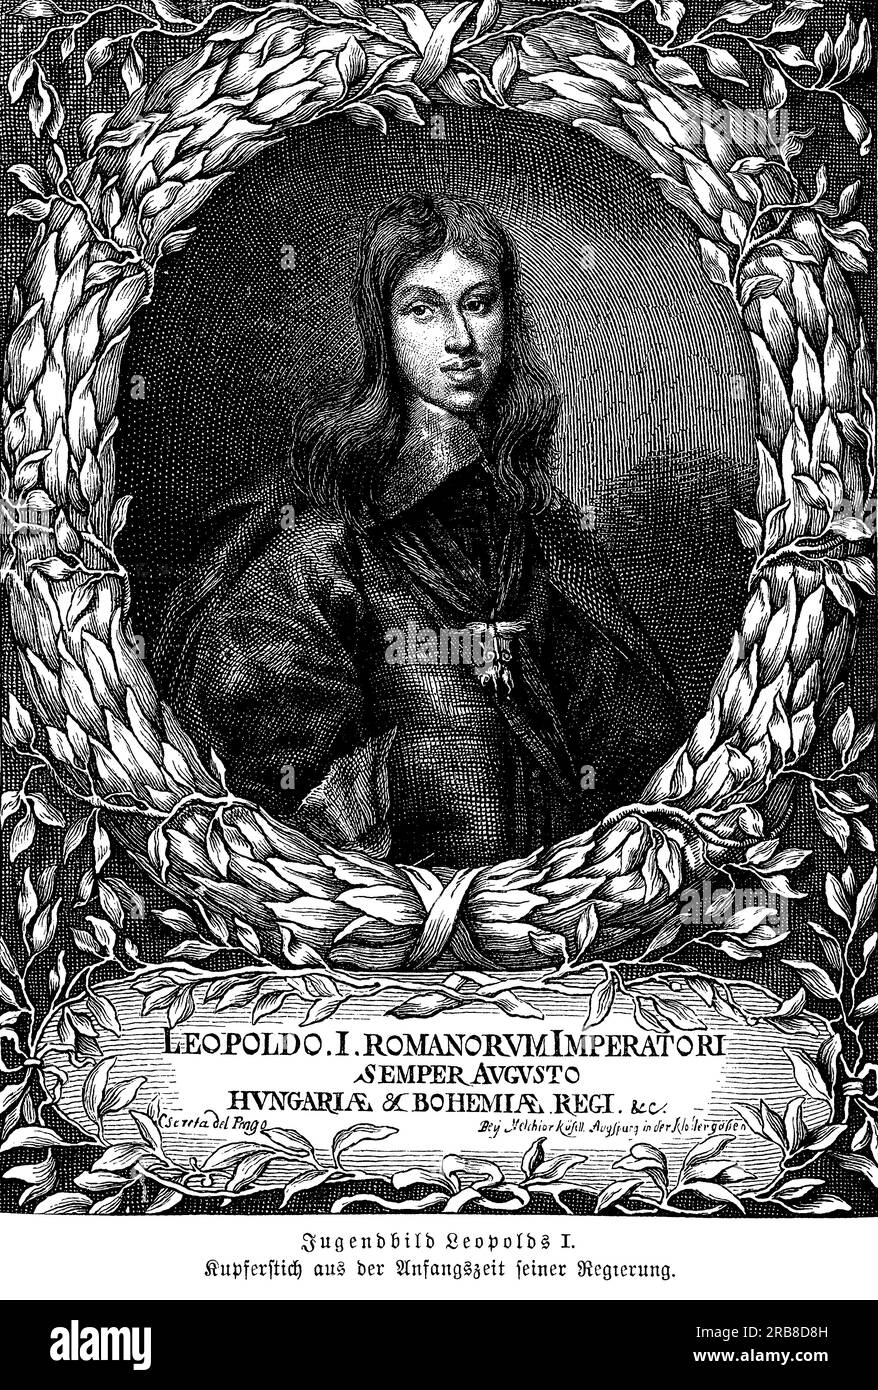 Leopold I  Holy Roman Emperor from 1658 to 1705,King of Hungary, Croatia, and Bohemia. He is known for his successful military campaigns against the Ottoman Empire and his role in the Great Turkish War. During his reign, he also fought against France in the War of the League of Augsburg and the War of the Spanish Succession. Leopold was a devout Catholic and supported the Counter-Reformation, promoting the construction of Baroque churches and monasteries throughout the empire. He also oversaw the expansion of Vienna and the construction of several magnificent palaces, including Schönbrunn Stock Photo